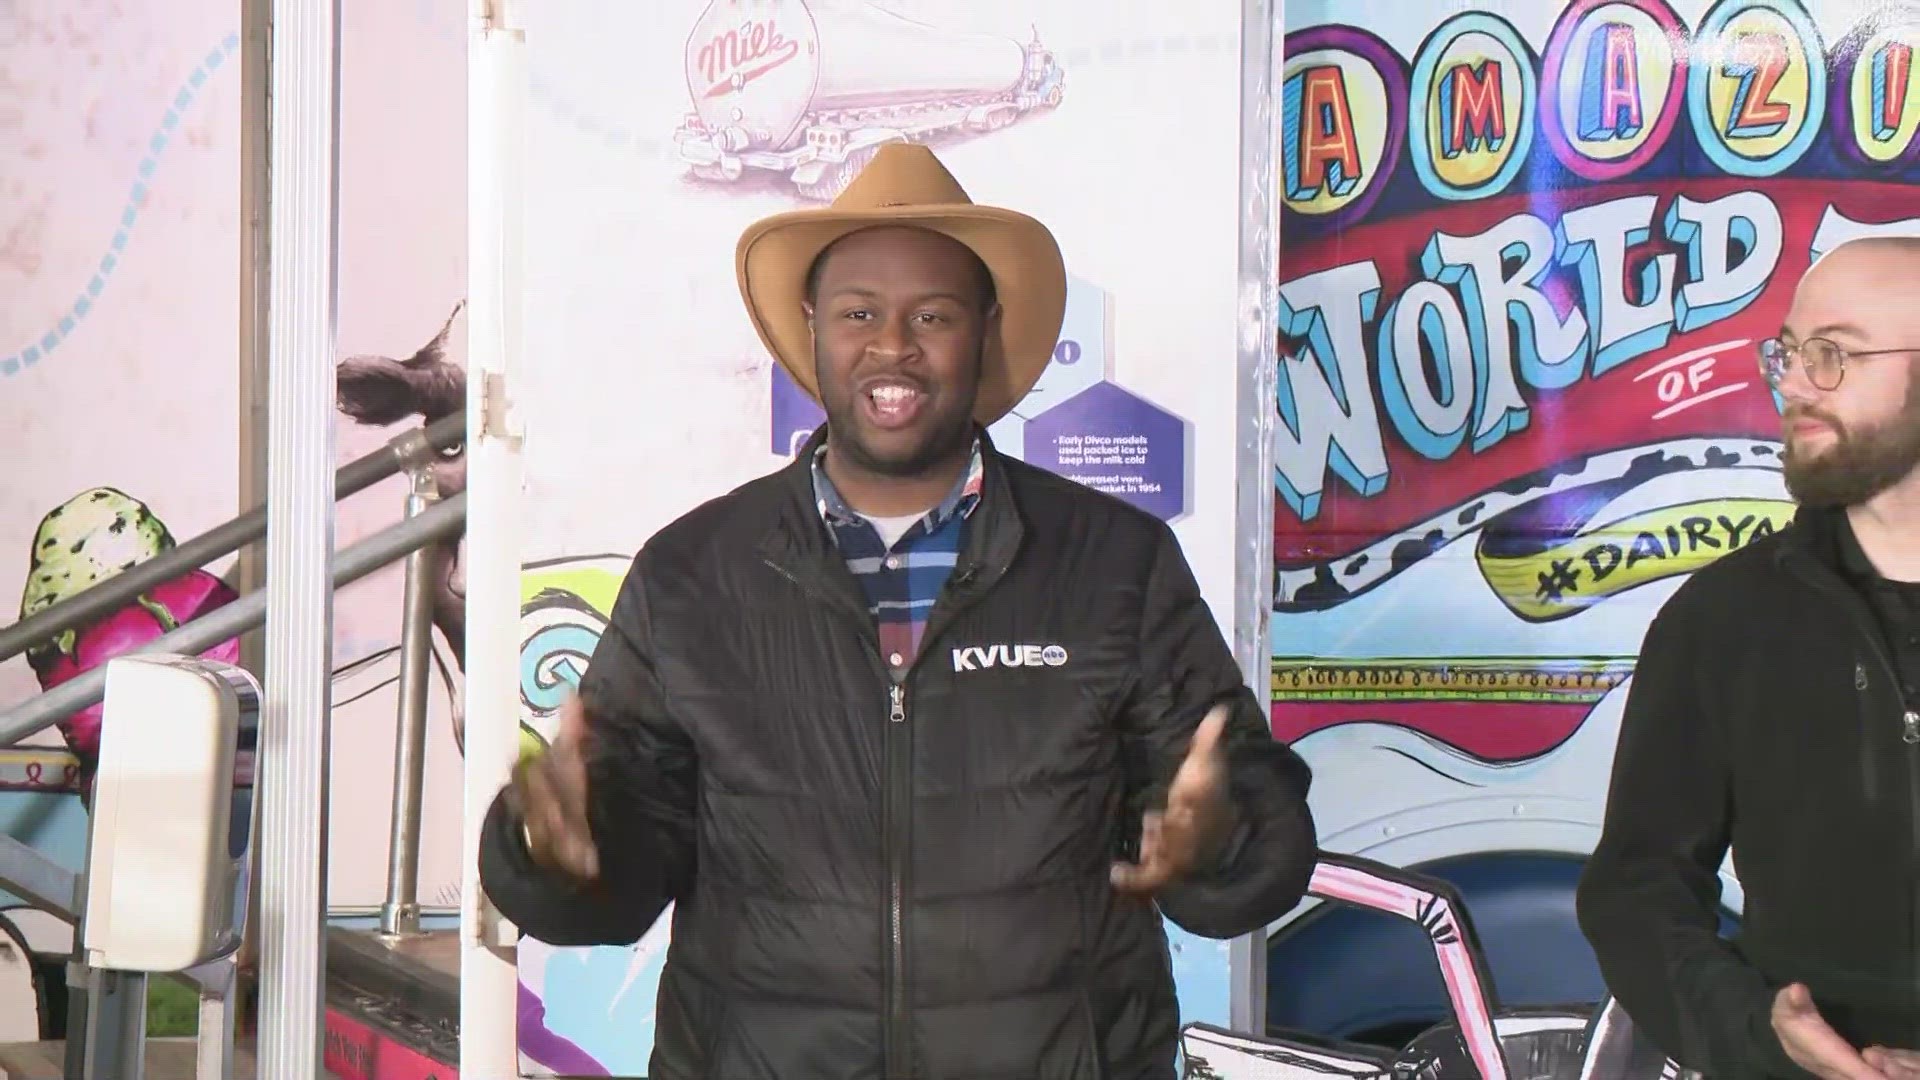 The rodeo is back in town! Rodeo Austin kicks off on Friday. Eric Pointer joined KVUE Daybreak live from the Travis County Expo Center.